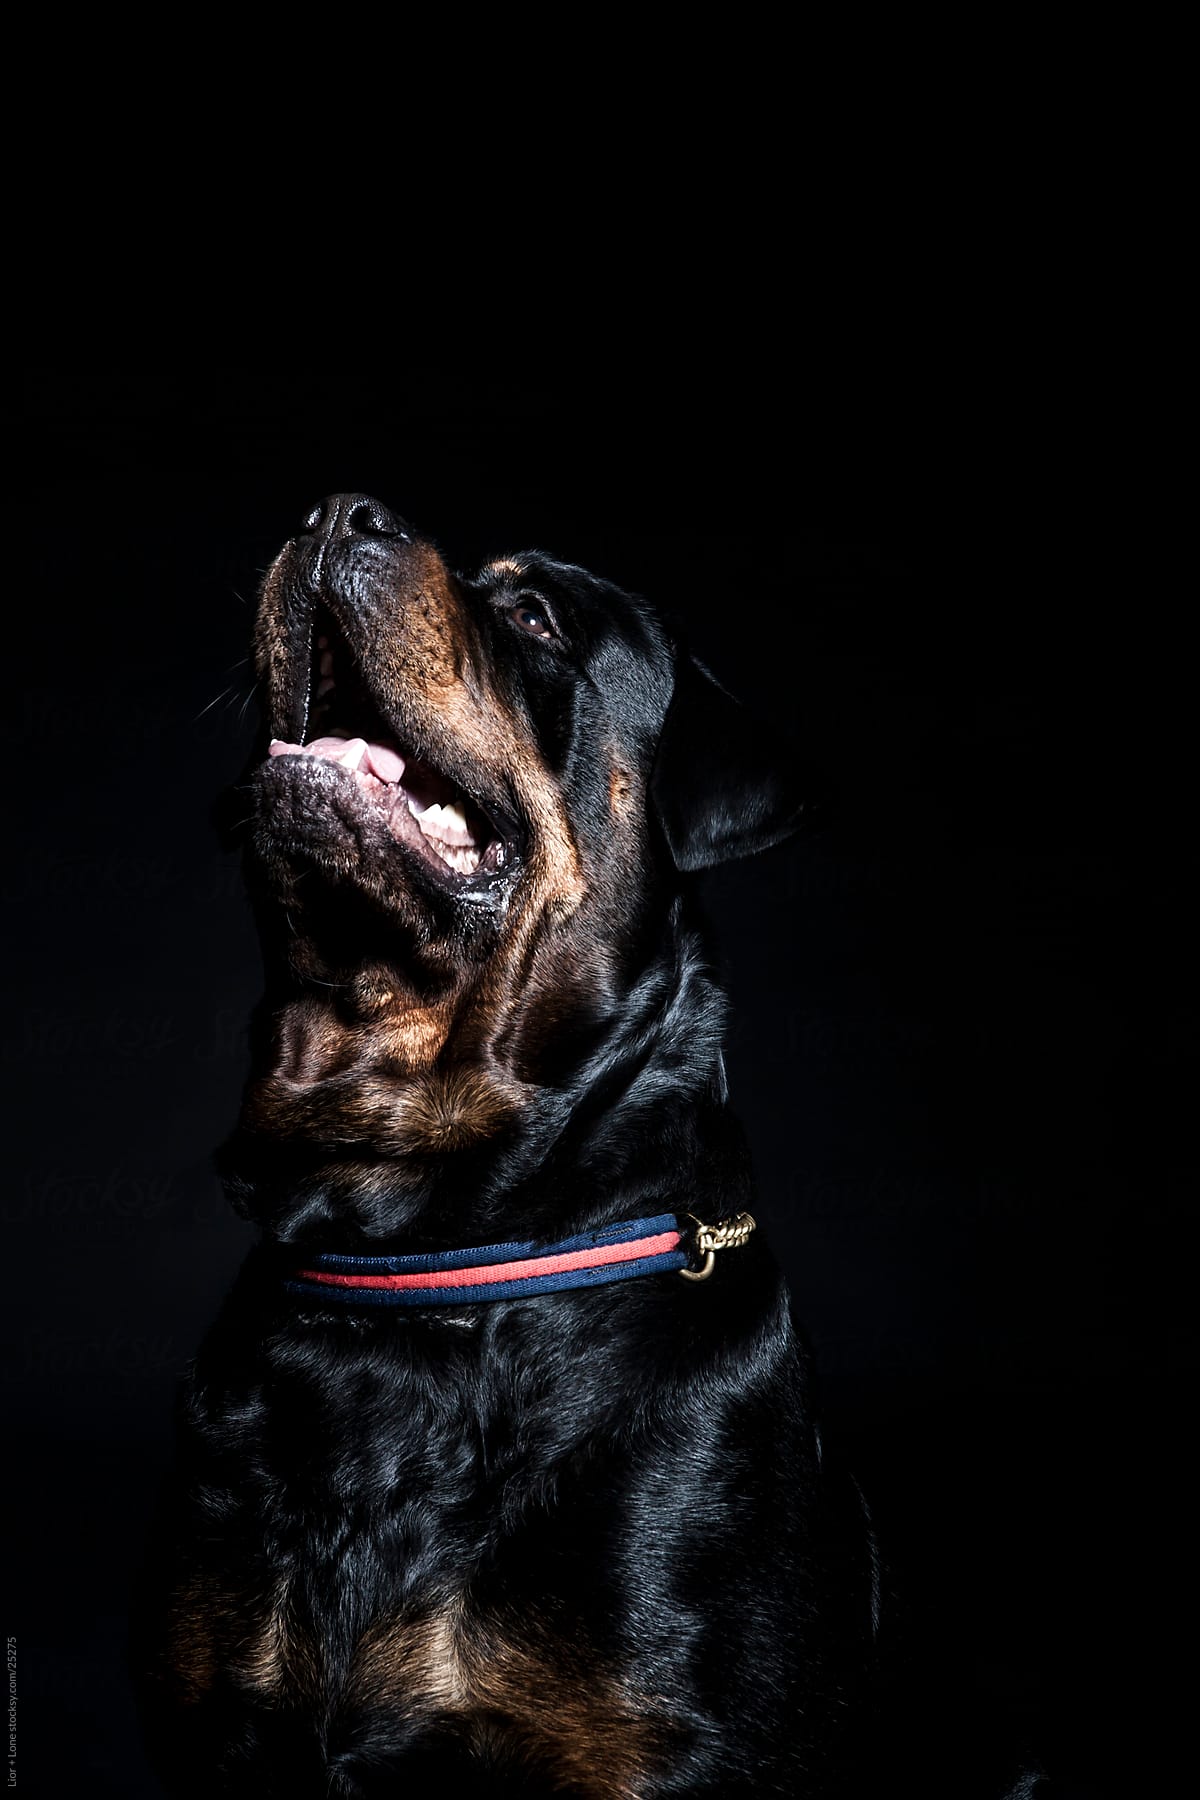 Rottweiler dog looking up with mouth open